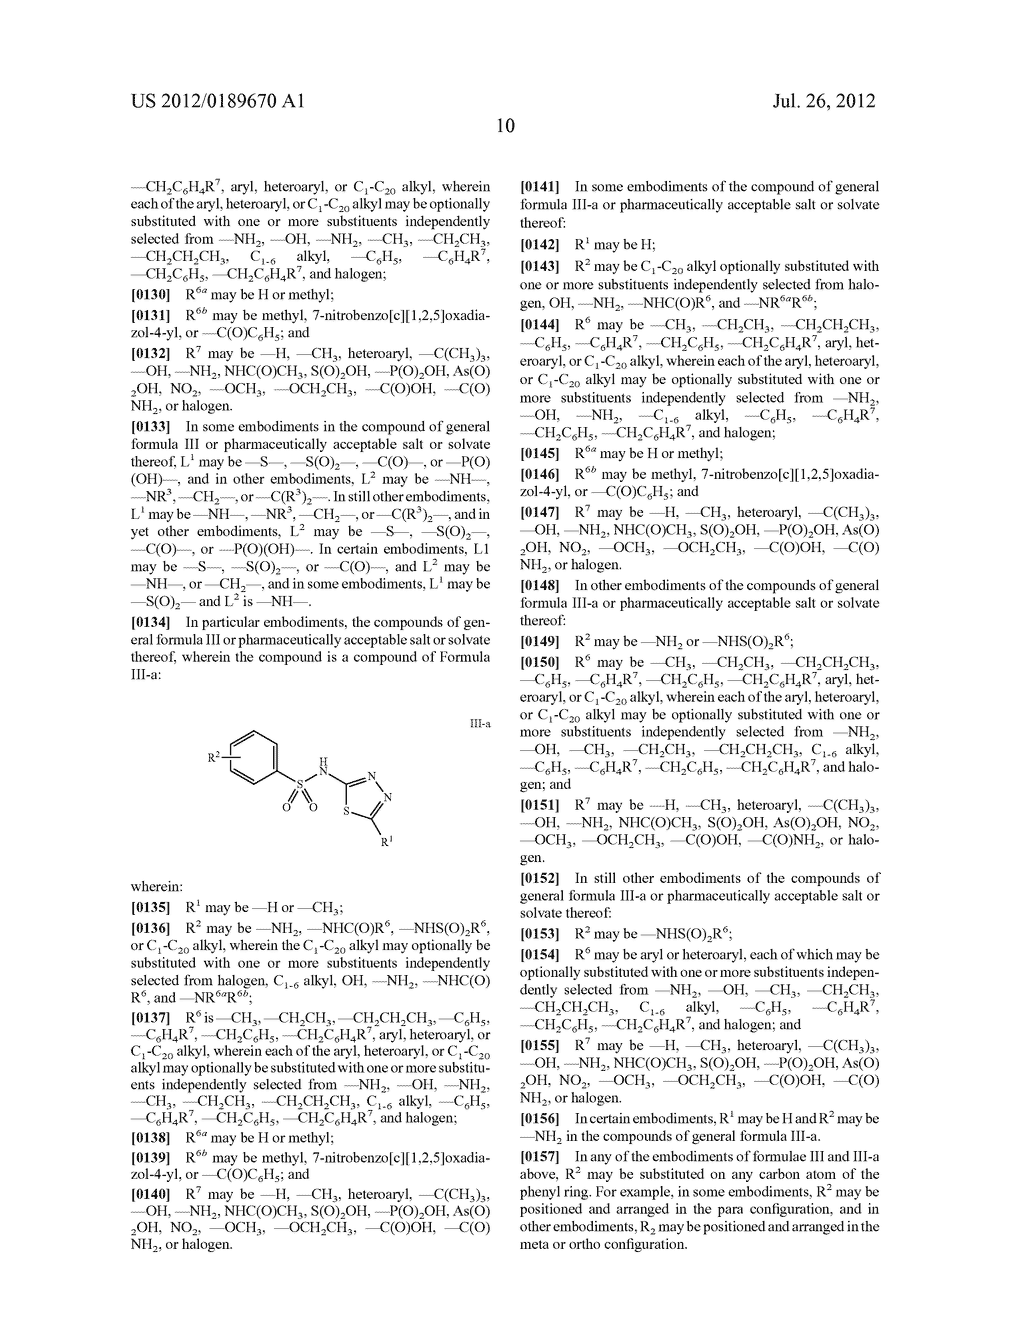 PHARMACEUTICAL COMPOSITIONS AND FORMULATIONS INCLUDING INHIBITORS OF THE     PLECKSTRIN HOMOLOGY DOMAIN AND METHODS FOR USING SAME - diagram, schematic, and image 44